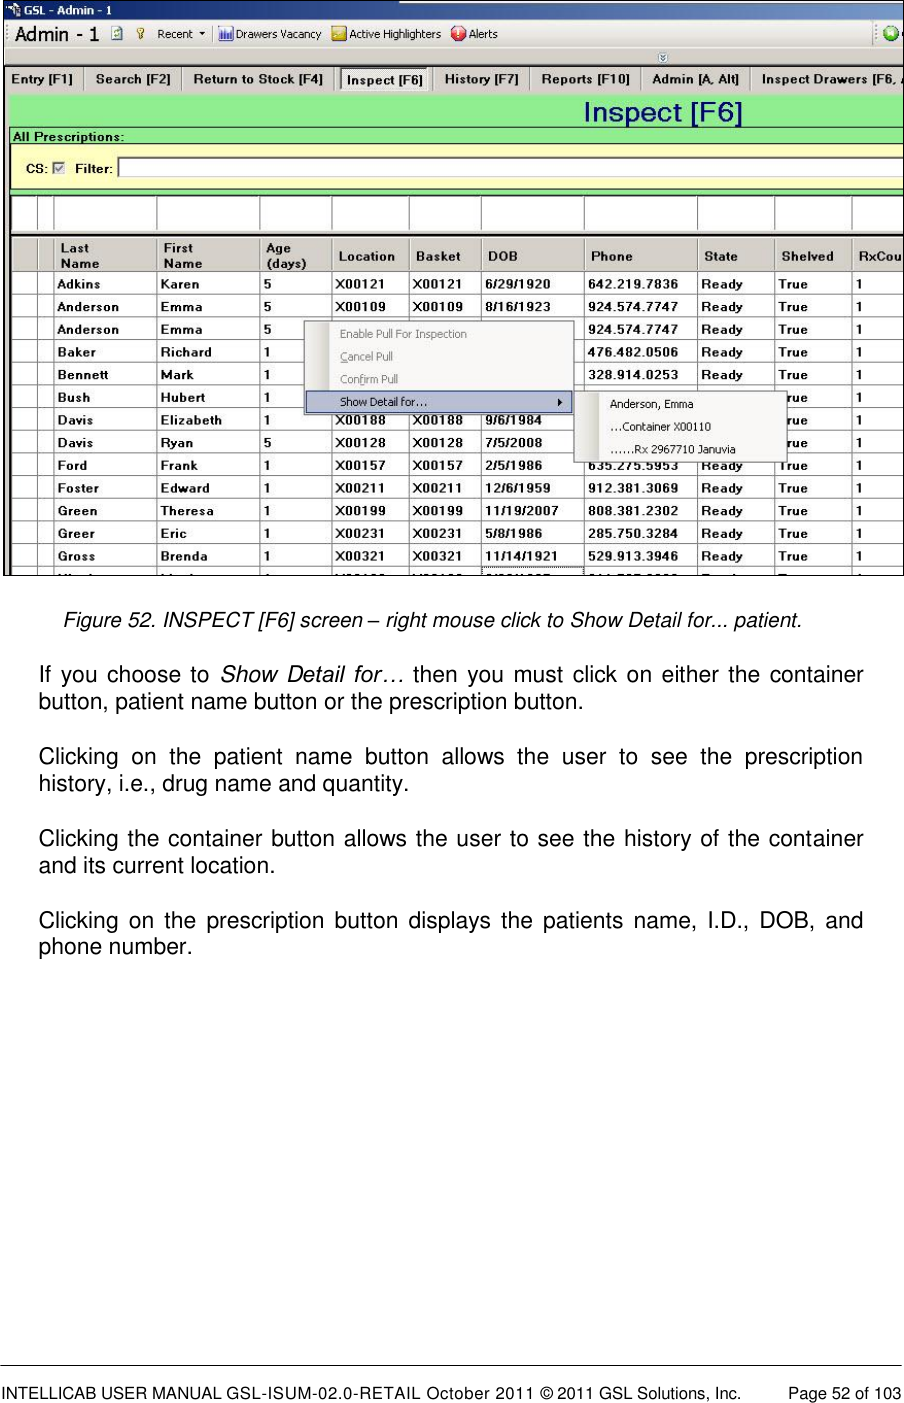  INTELLICAB USER MANUAL GSL-ISUM-02.0-RETAIL October 2011 © 2011 GSL Solutions, Inc.   Page 52 of 103    Figure 52. INSPECT [F6] screen – right mouse click to Show Detail for... patient. If you choose to Show Detail  for… then you must click on either the container button, patient name button or the prescription button. Clicking  on  the  patient  name  button  allows  the  user  to  see  the  prescription history, i.e., drug name and quantity. Clicking the container button allows the user to see the history of the container and its current location. Clicking on  the prescription button displays the  patients name,  I.D.,  DOB,  and phone number.  